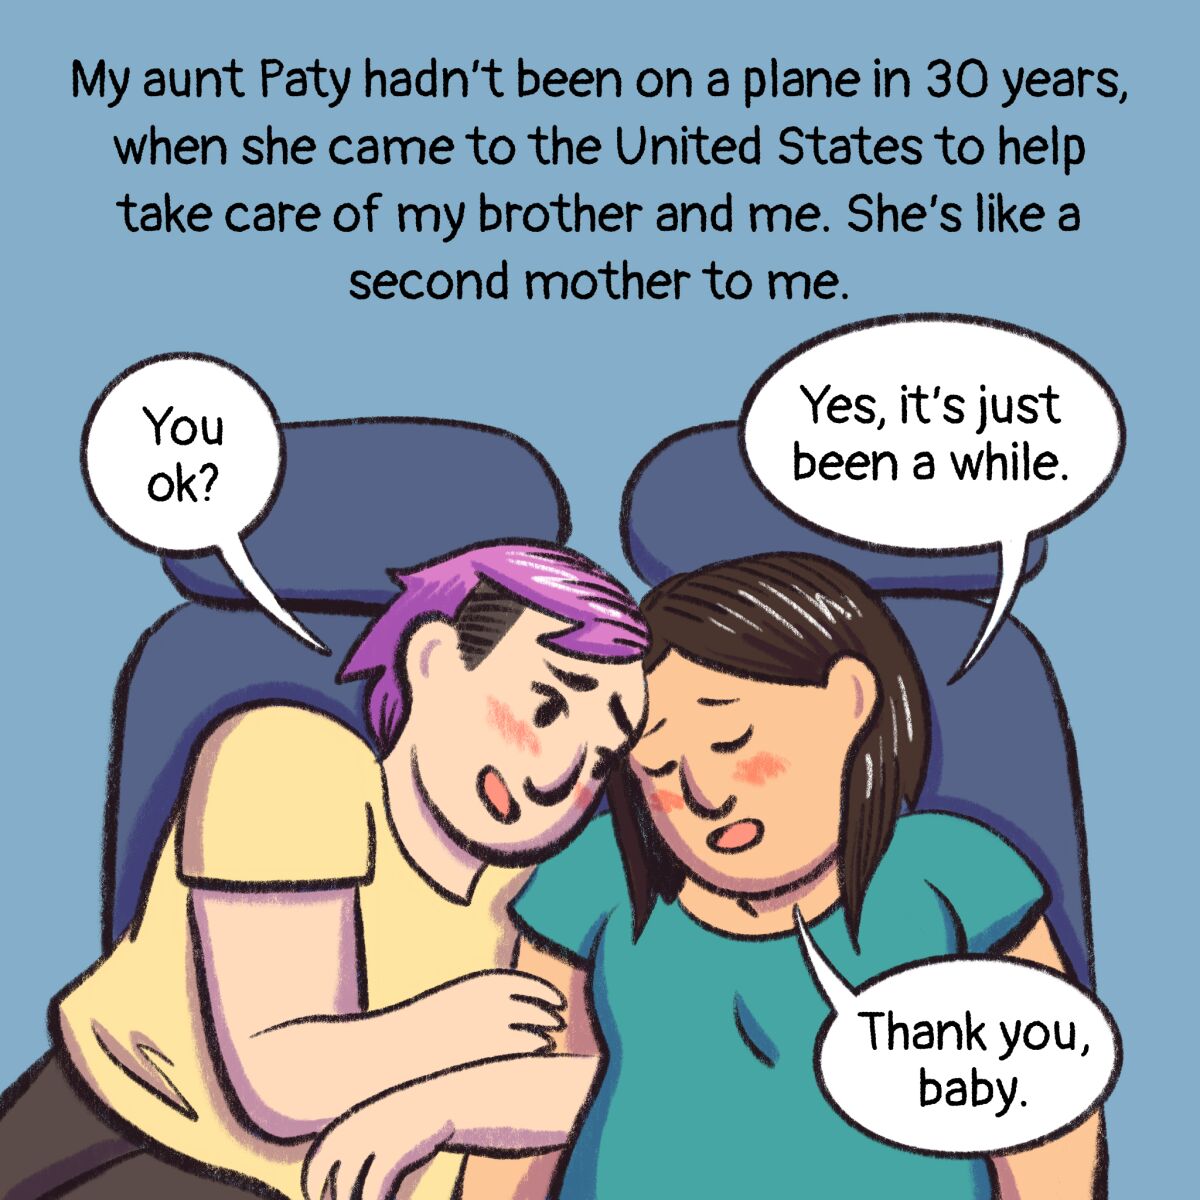 My aunt paty hadn't been on a plane in 30 years, when she came to the United States to help take care of my brother and me.